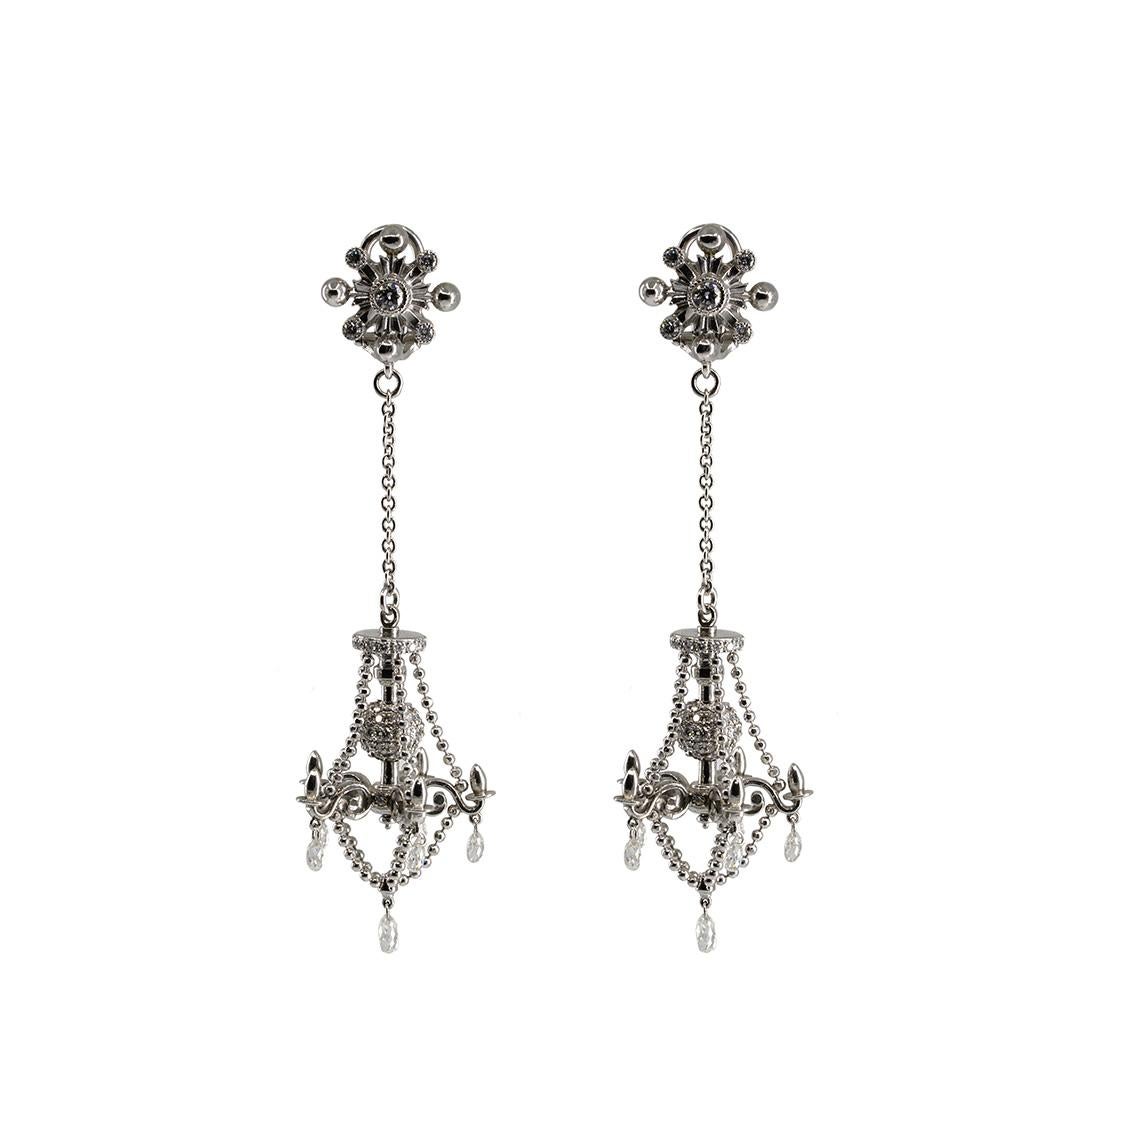 These chandelier earrings are the epitome of opulence. Unlike a typical chandelier earring, William has crafted this design as an actual chandelier you might find hanging in a Victorian mansion. 

Delicately crafted by hand they are made in deluxe